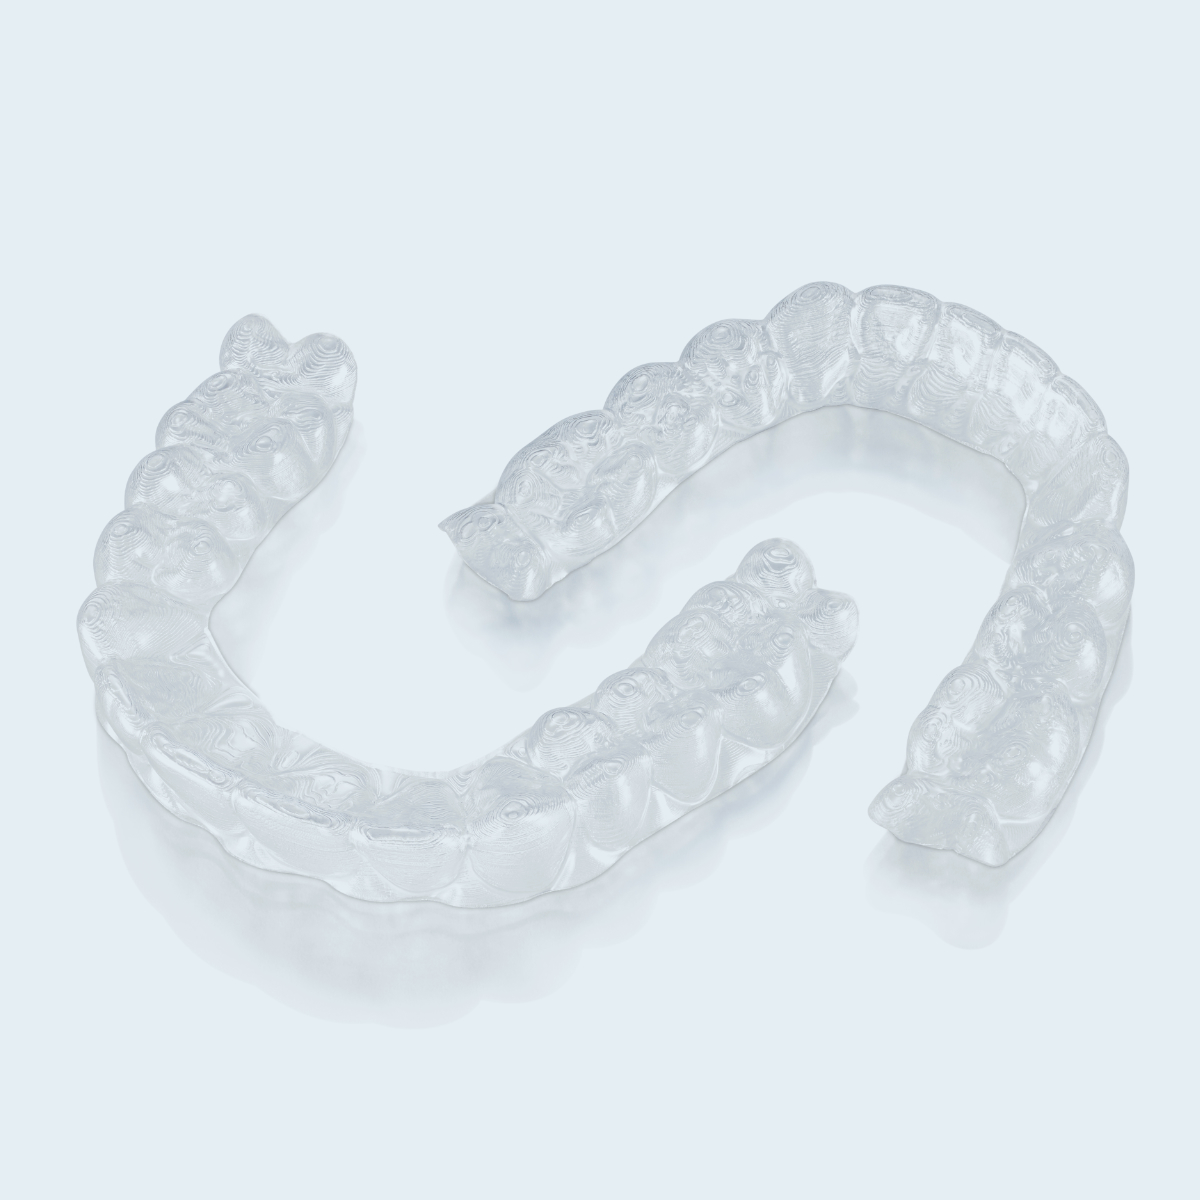 3m Clarity clear aligners on model